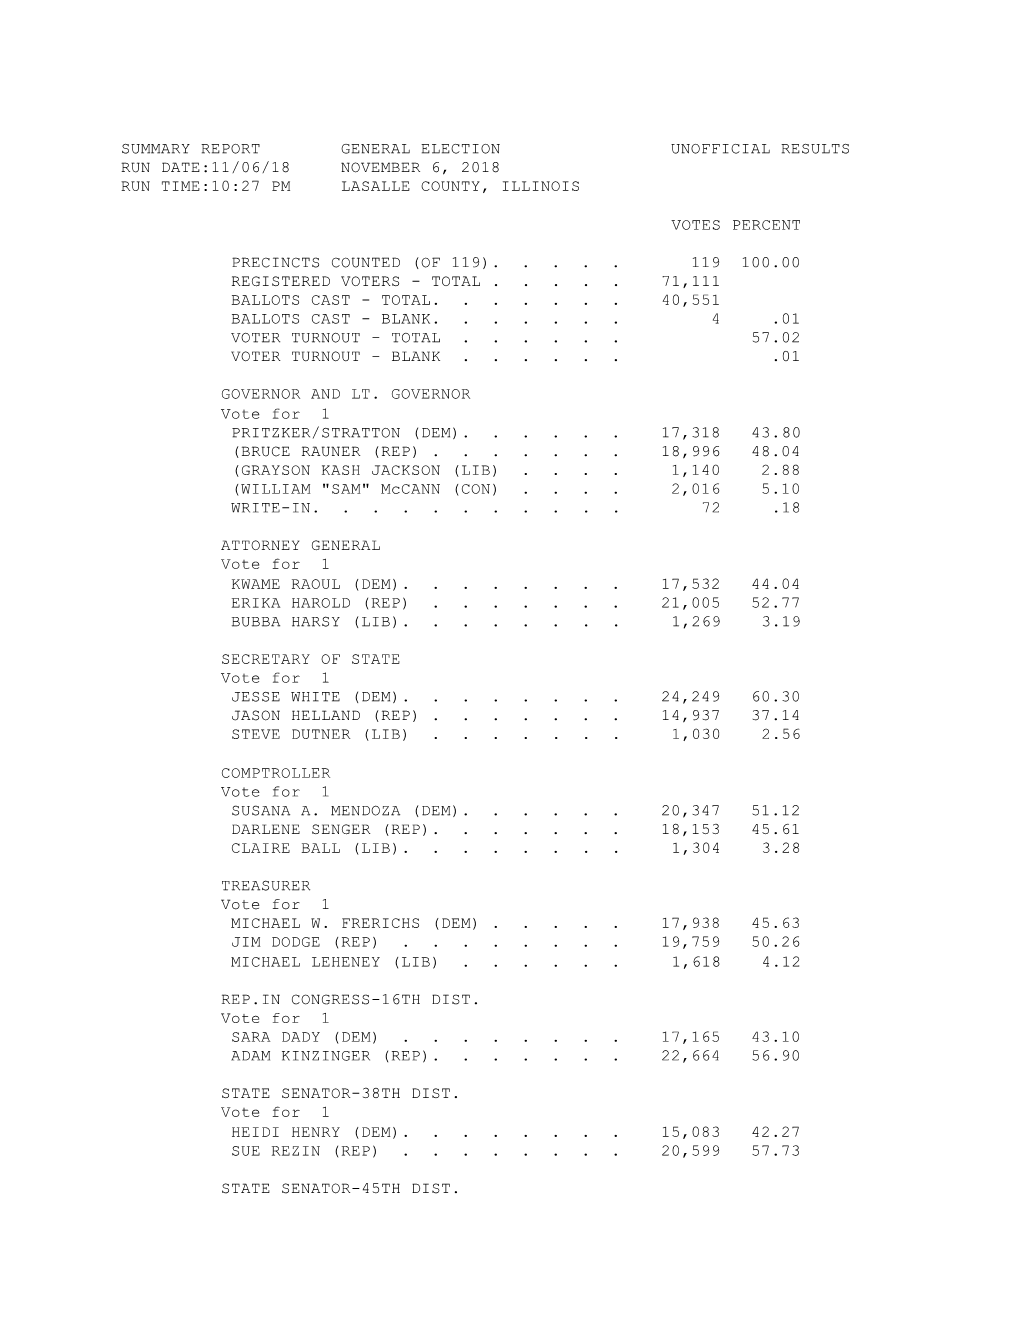 Summary Report General Election Unofficial Results Run Date:11/06/18 November 6, 2018 Run Time:10:27 Pm Lasalle County, Illinois